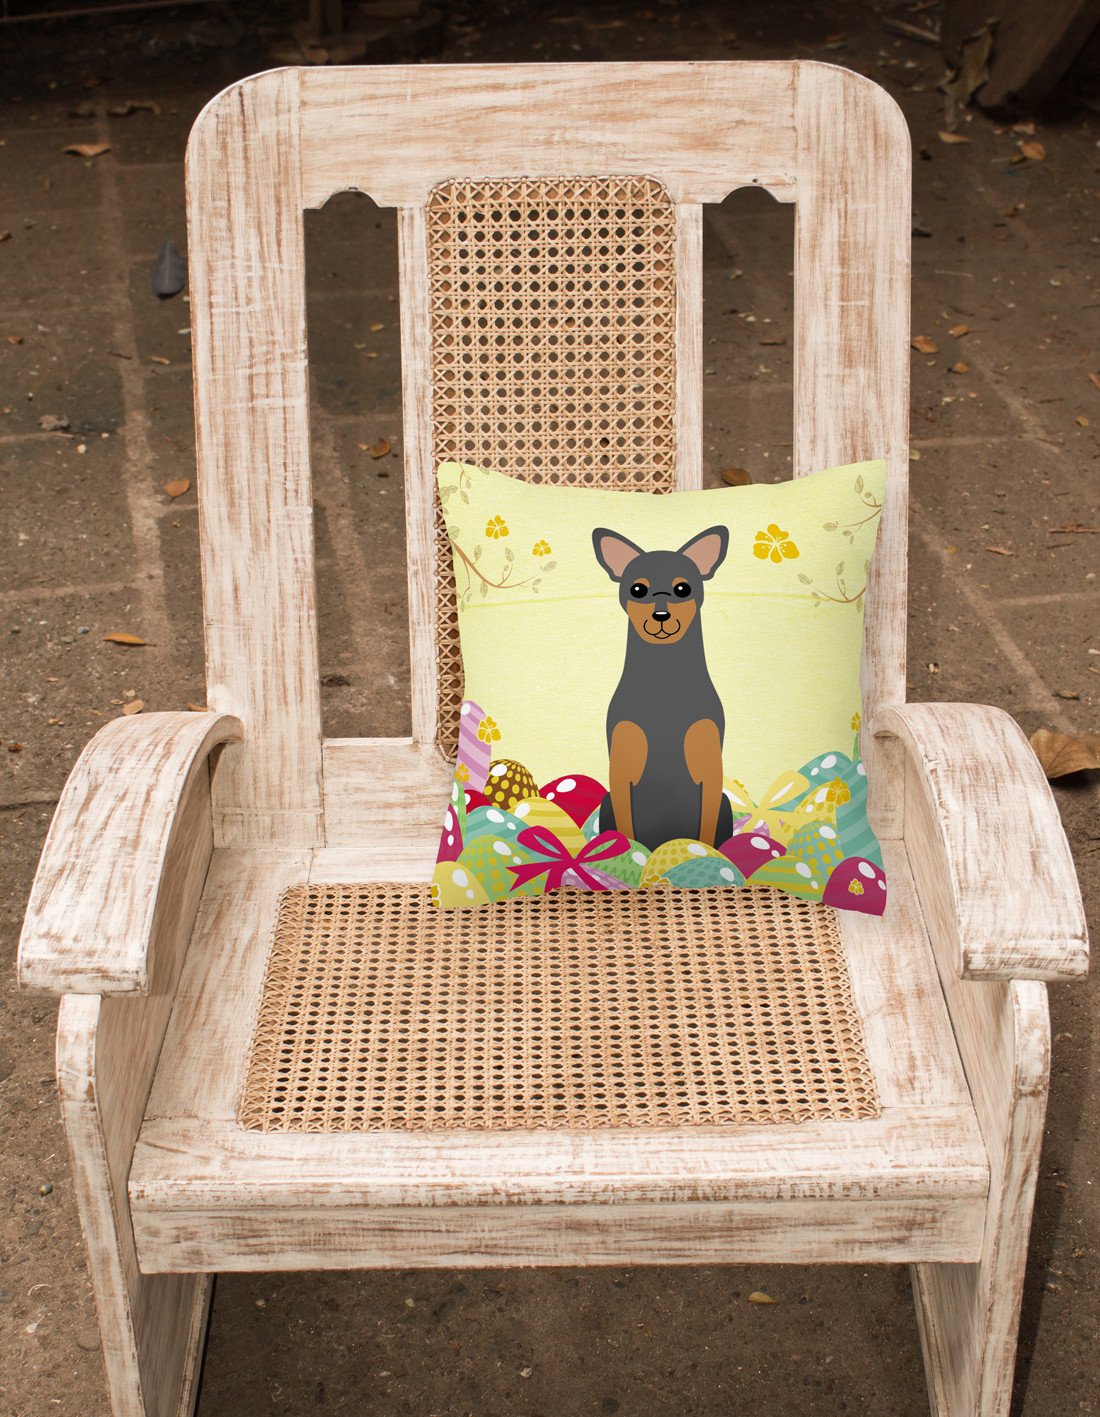 Easter Eggs Manchester Terrier Fabric Decorative Pillow BB6028PW1818 by Caroline's Treasures